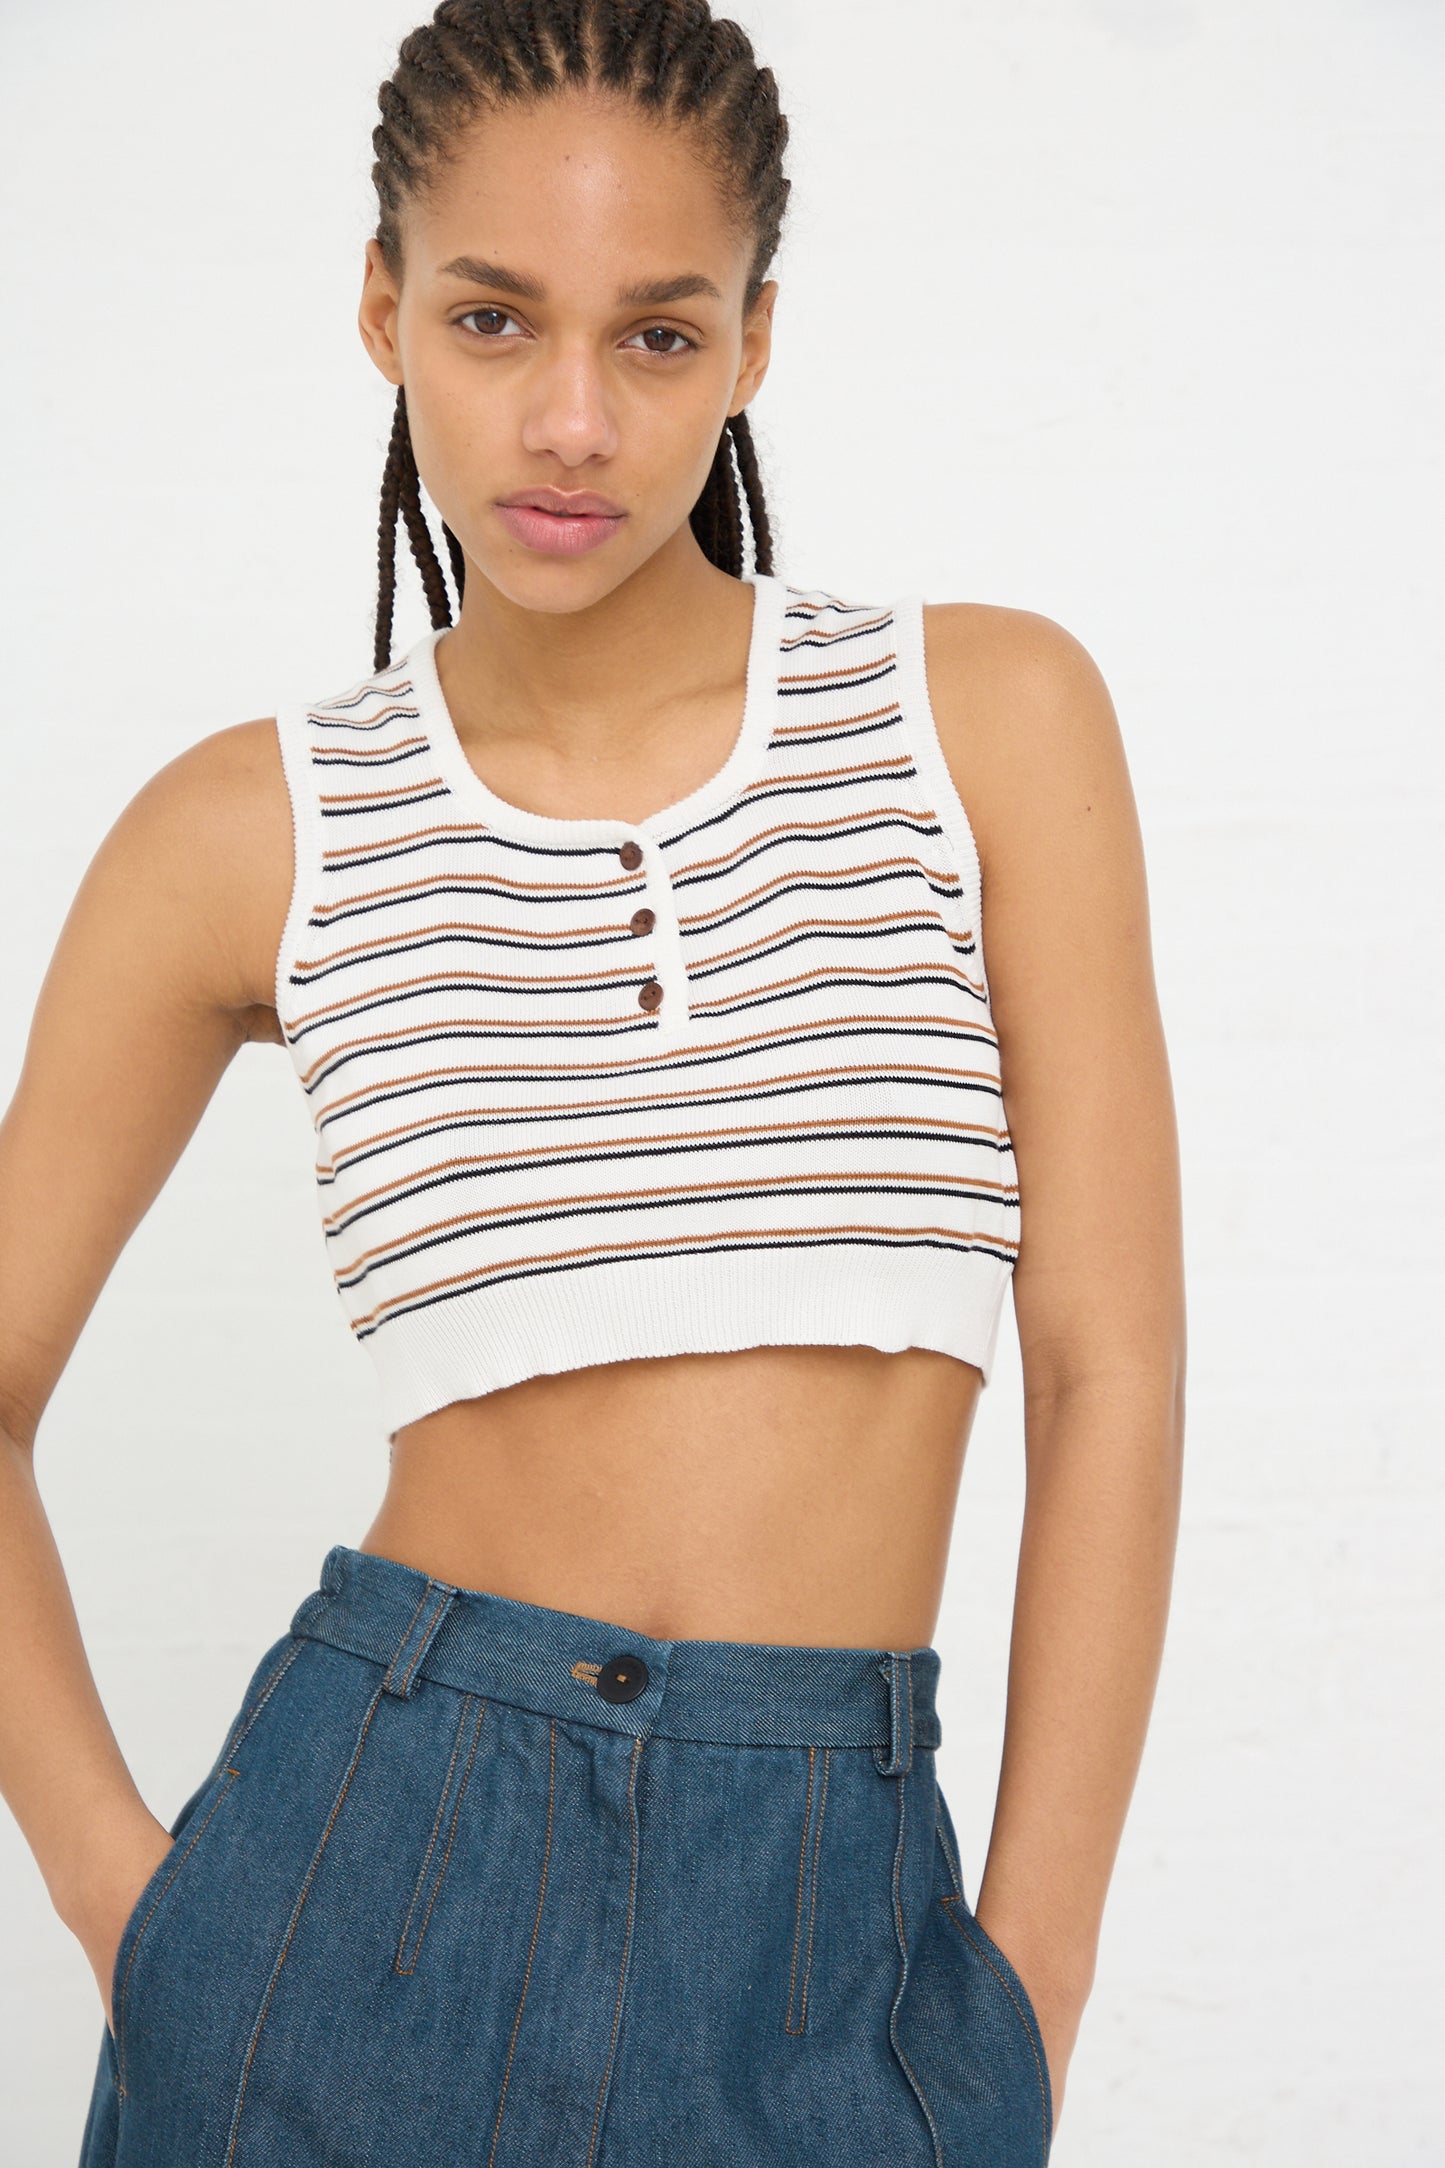 A woman in a Cordera organic cotton striped crop top and high-waisted denim pants posing for the camera.